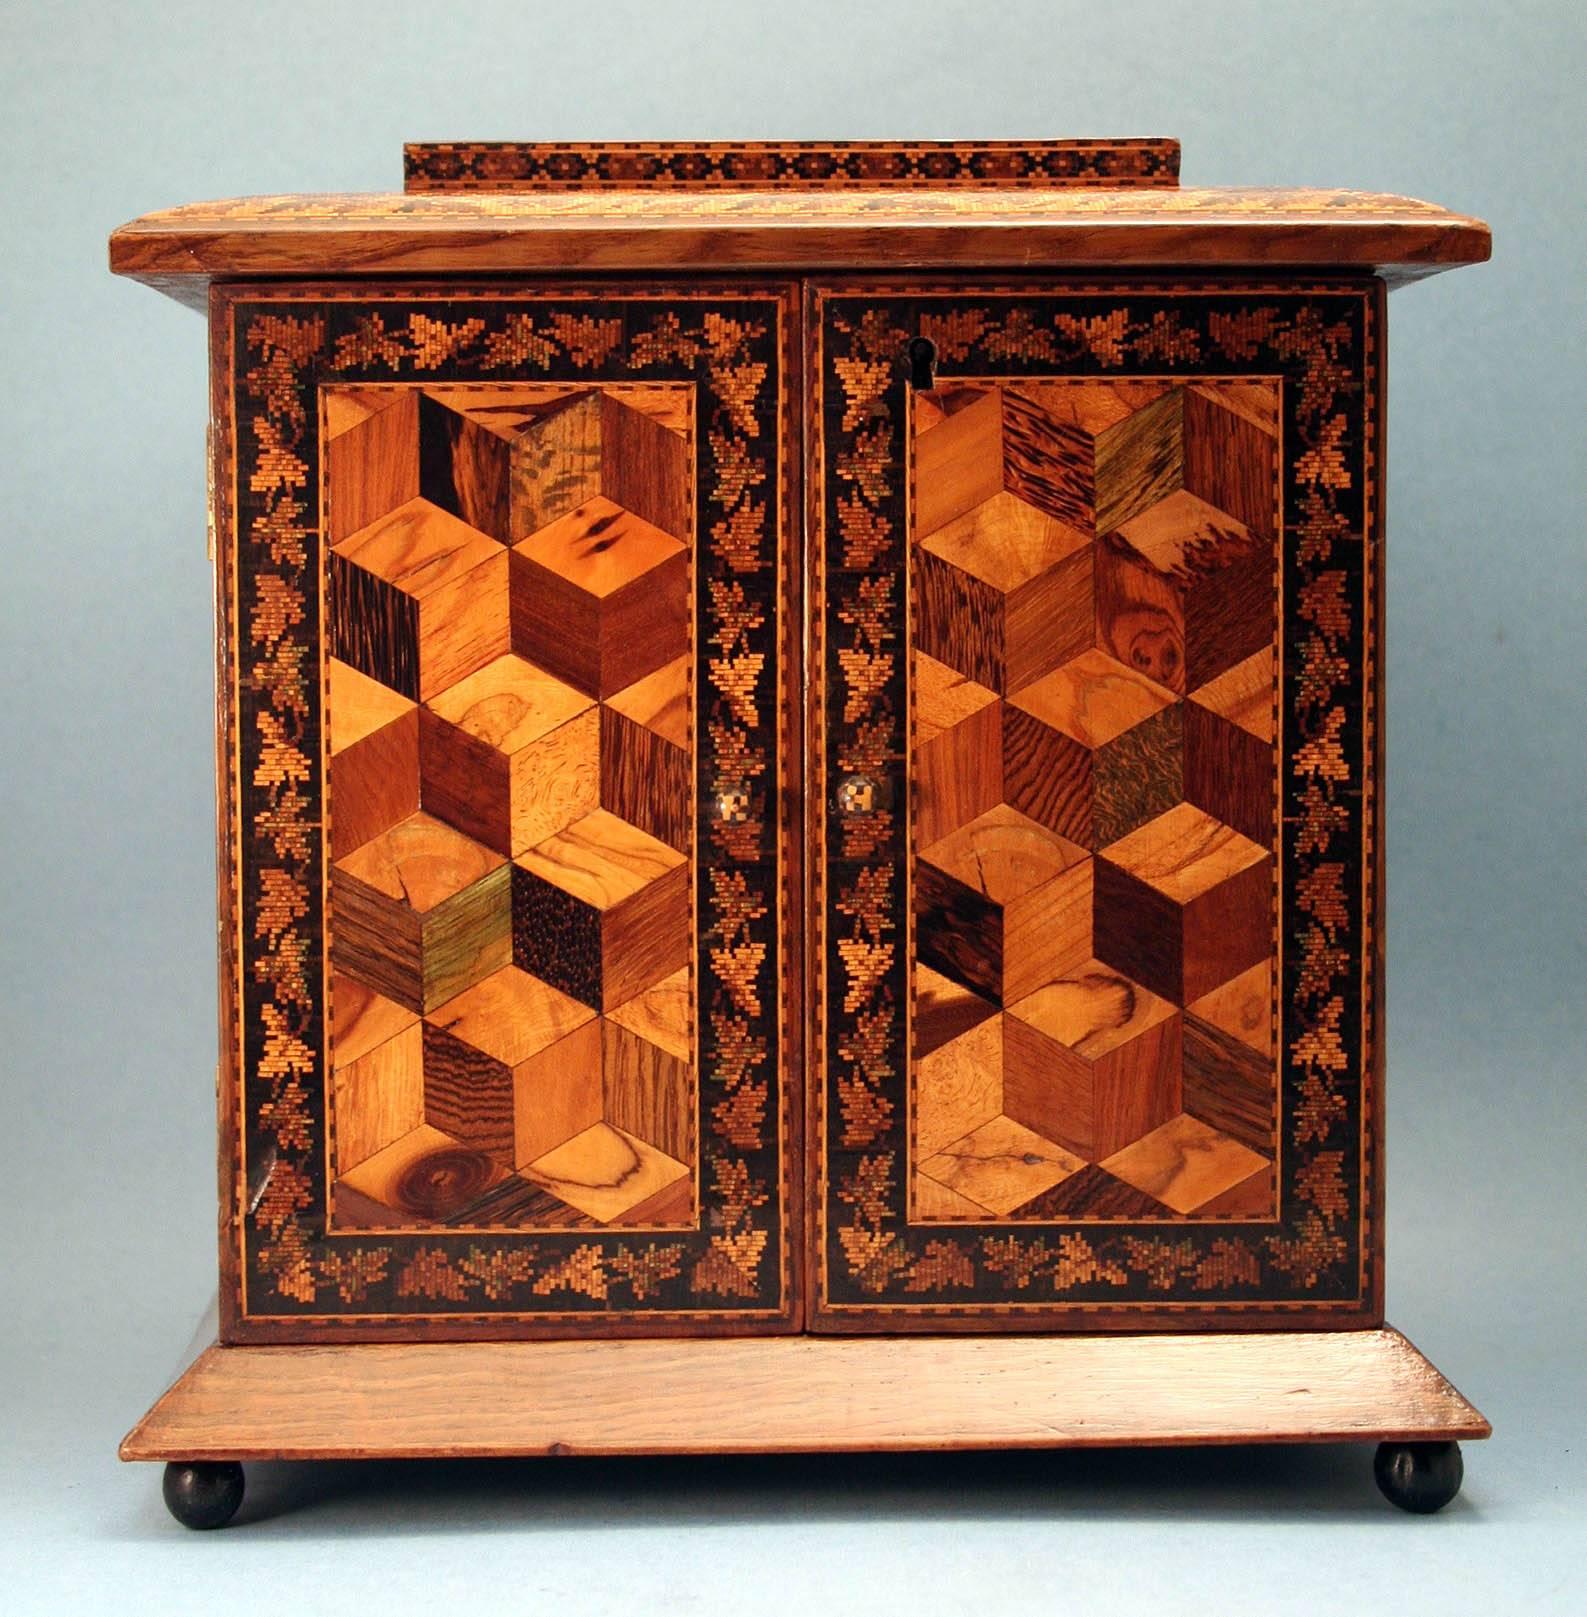 Remarkable antique English tunbridgeware dresser cabinet or jewelry box in olivewood with tessellated mosaic inlaid decoration, having a stepped lid with inlaid castle and floral decoration, two cabinet doors with 